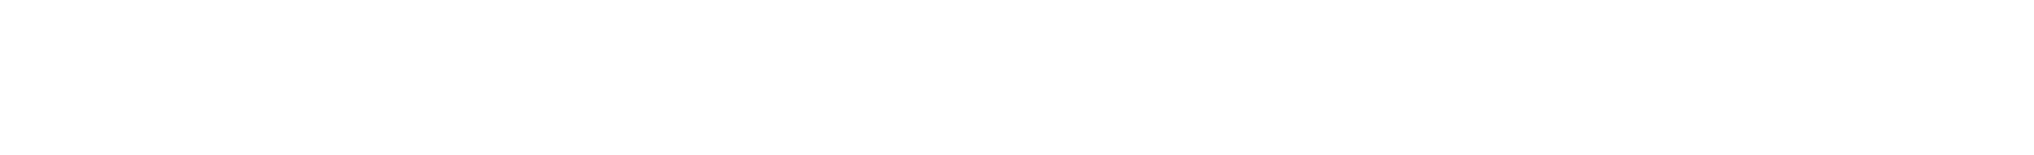 criminal lawyer in toronto social proof | Criminal Lawyer North York | Free Consultation